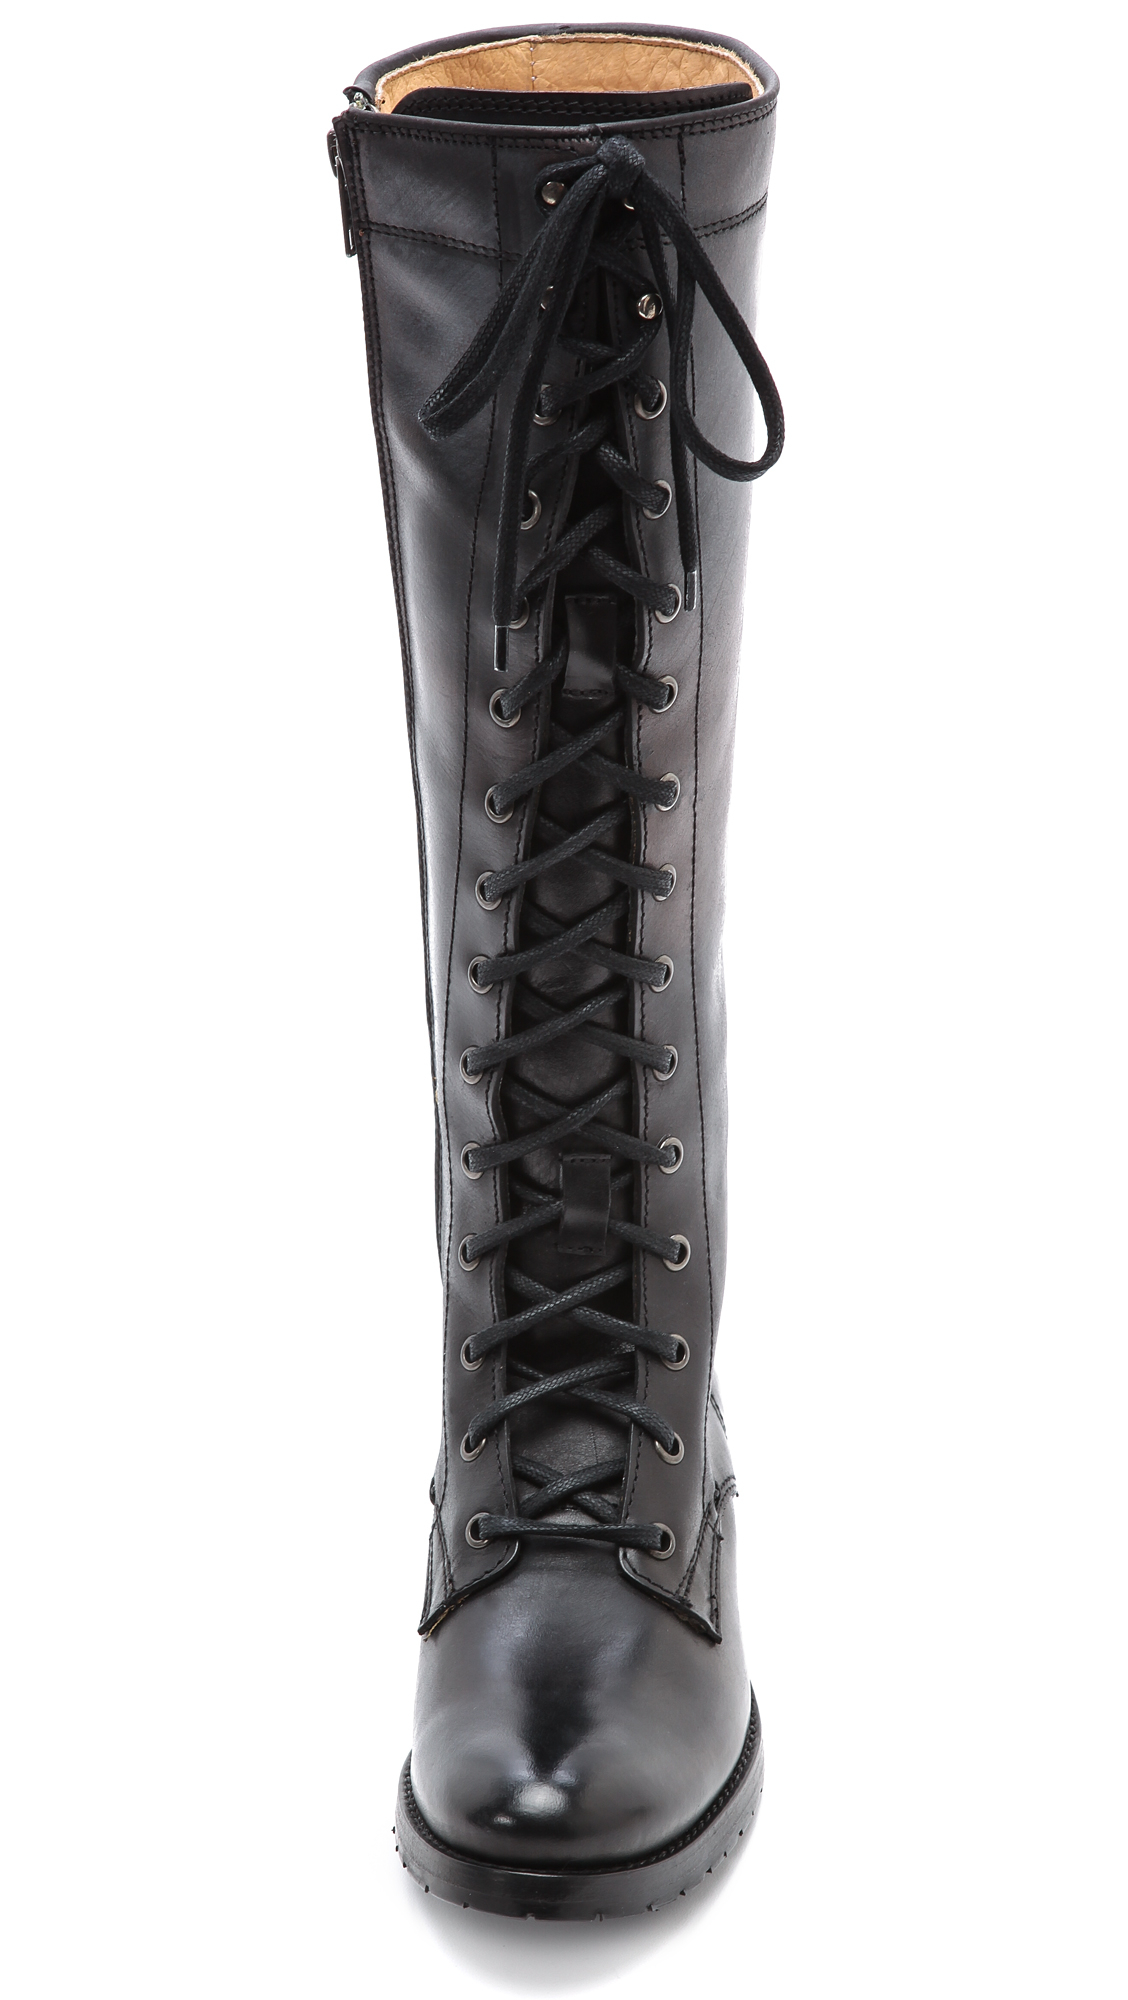 Frye Melissa Tall Lace Up Boots - Black | Lyst